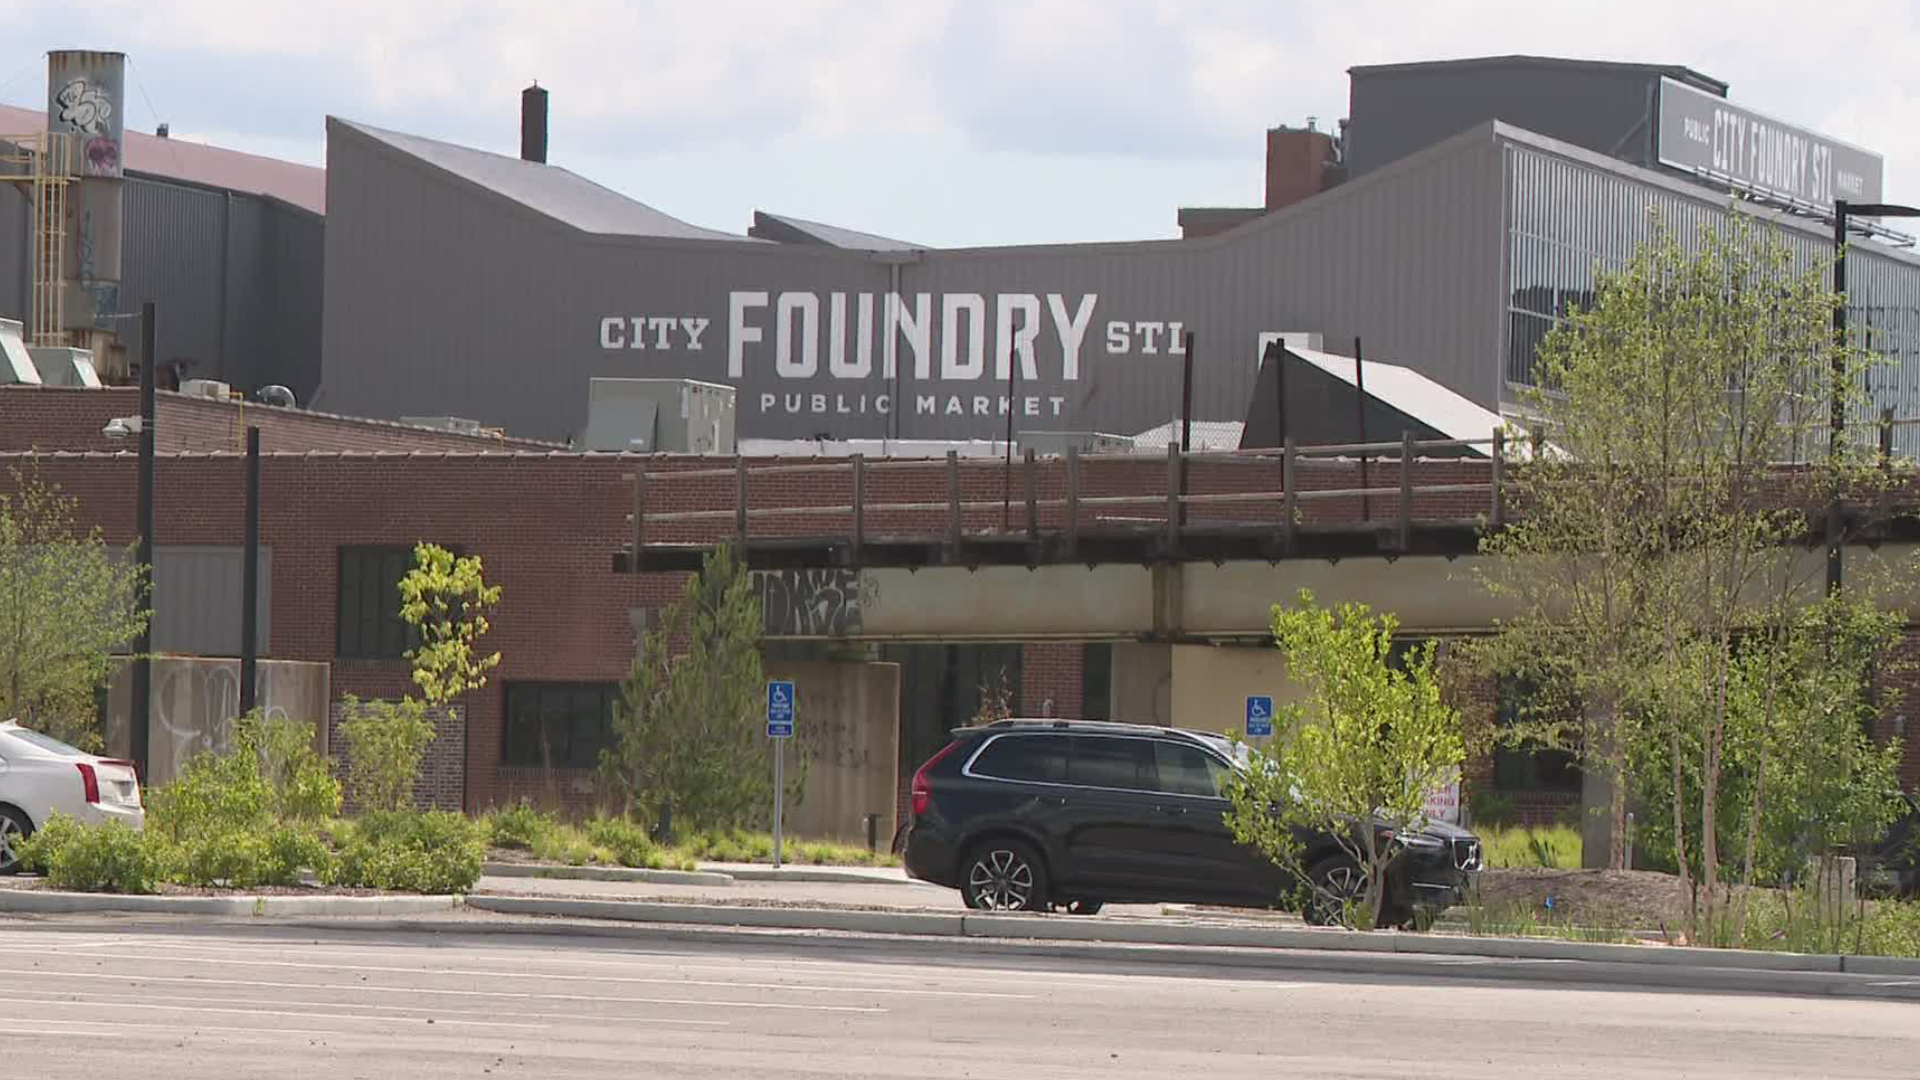 City Foundry said it decided to wait to open most of the development for the health and safety of the public amid the pandemic